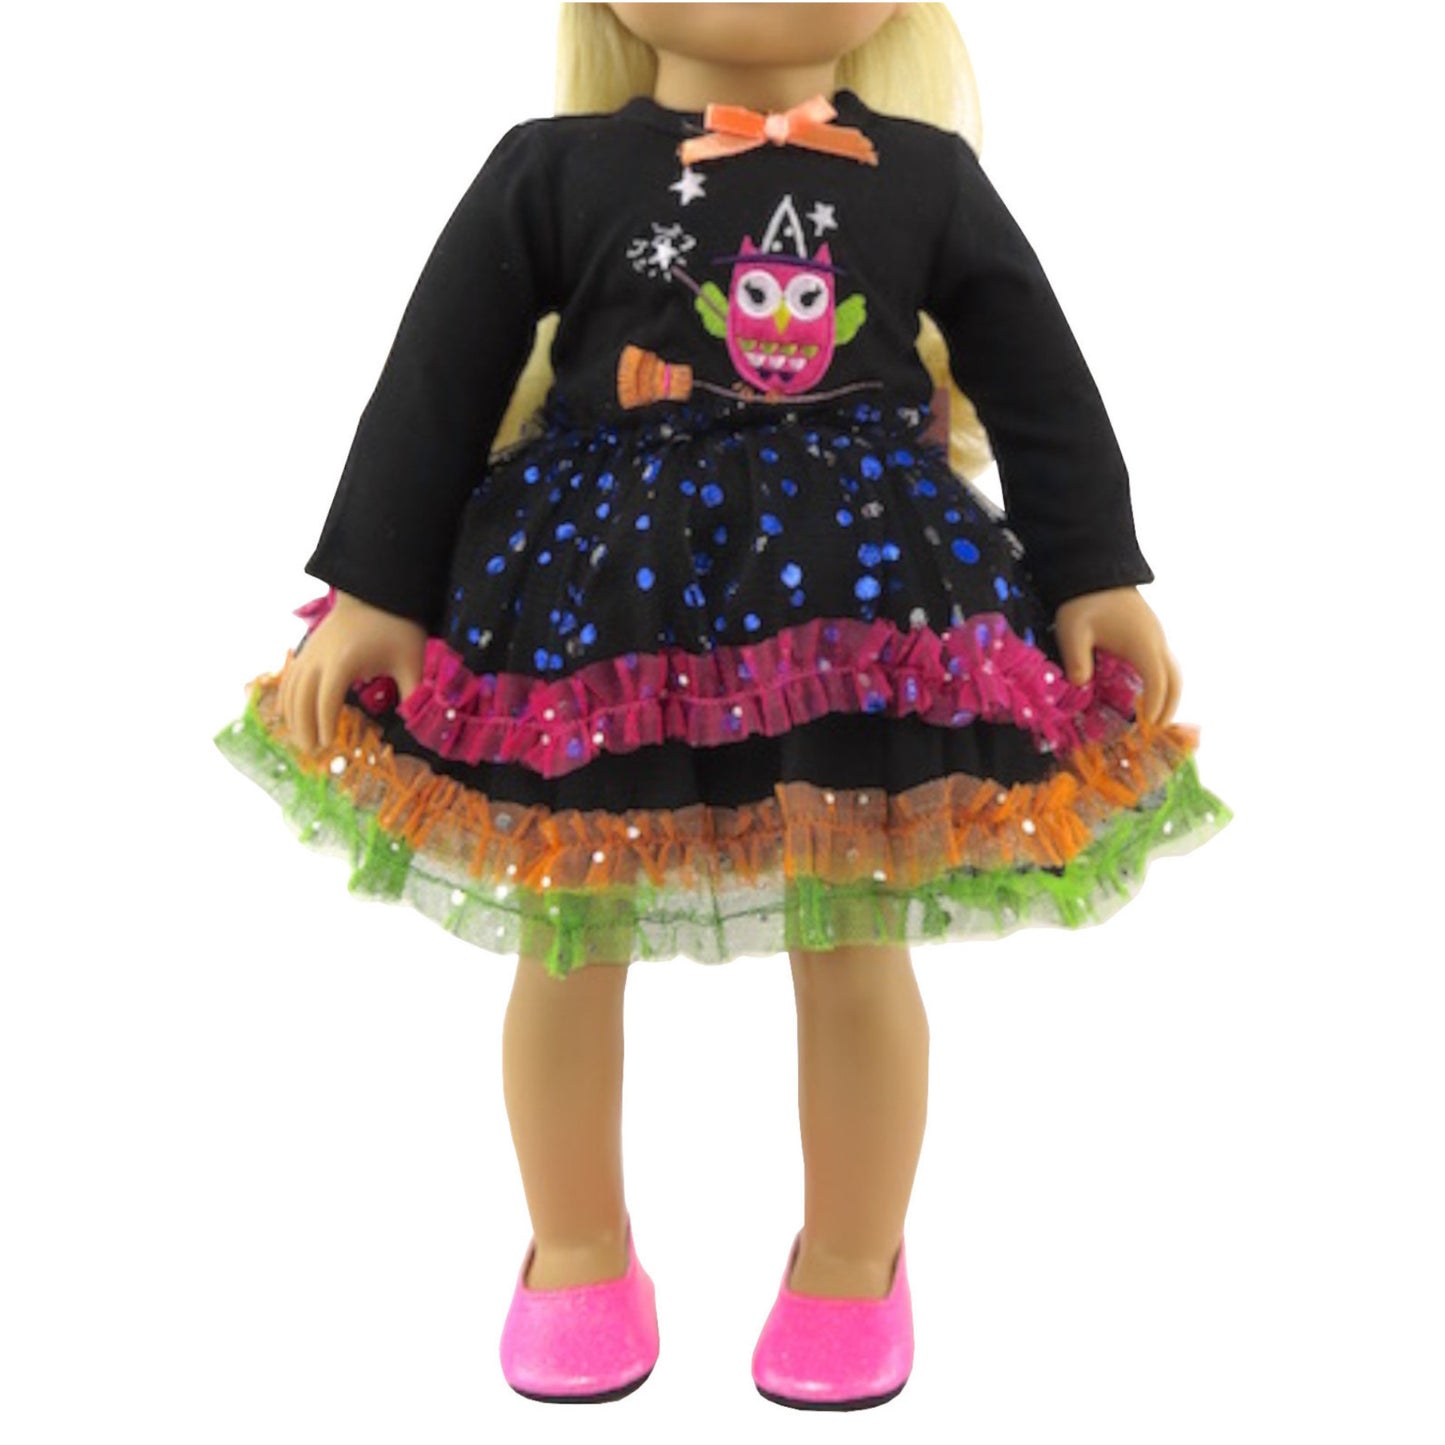 Magic Owl Dress for 18-inch dolls with doll